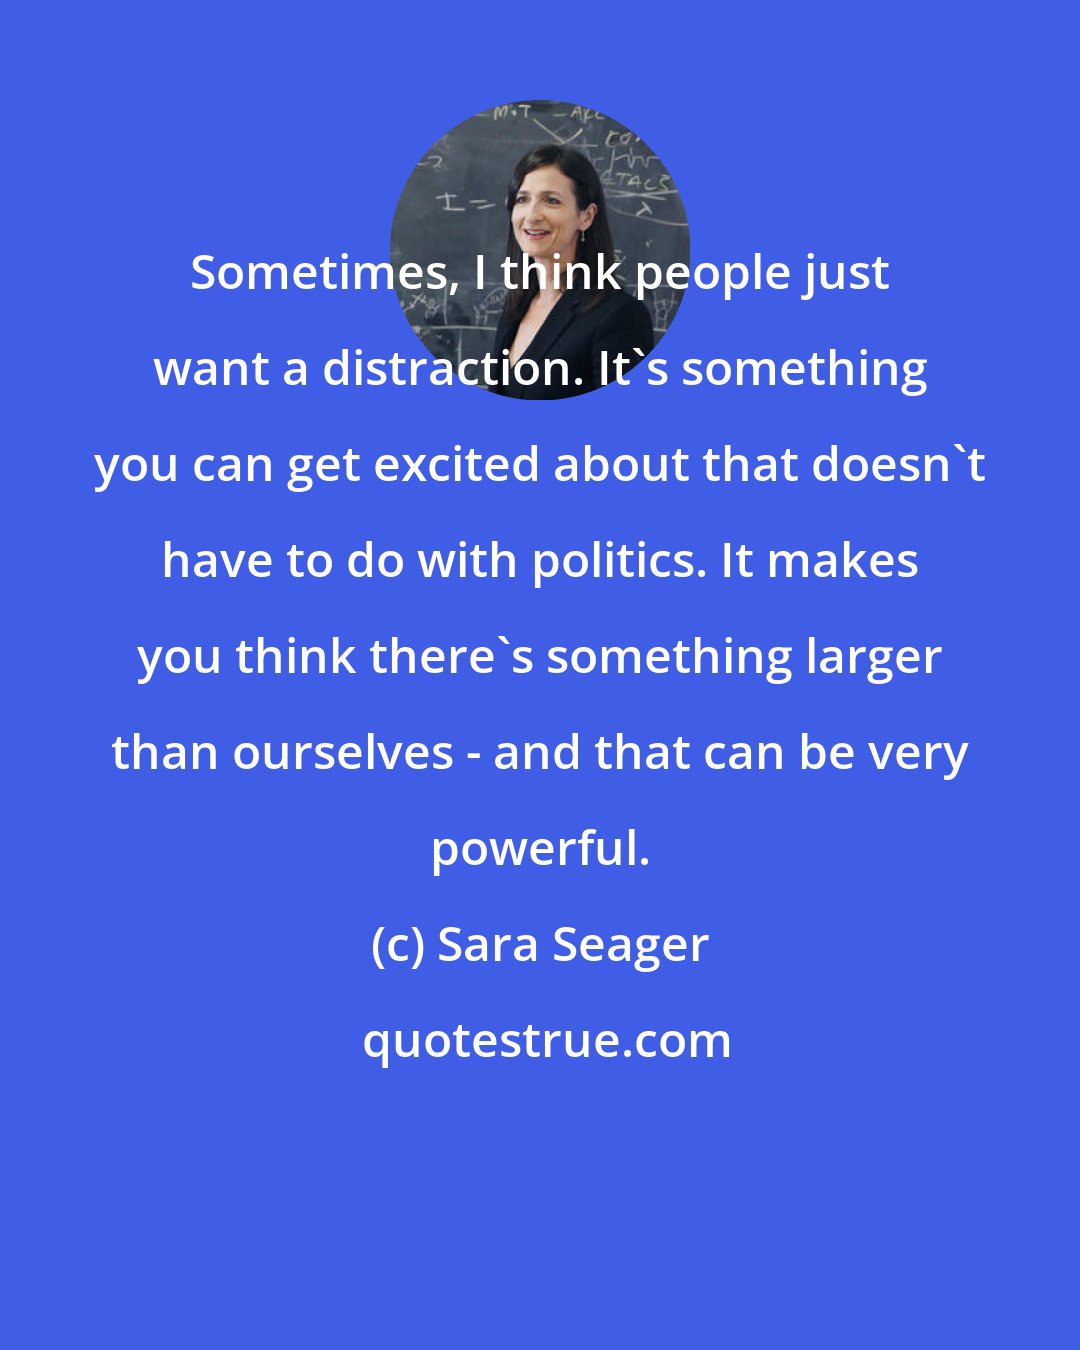 Sara Seager: Sometimes, I think people just want a distraction. It's something you can get excited about that doesn't have to do with politics. It makes you think there's something larger than ourselves - and that can be very powerful.